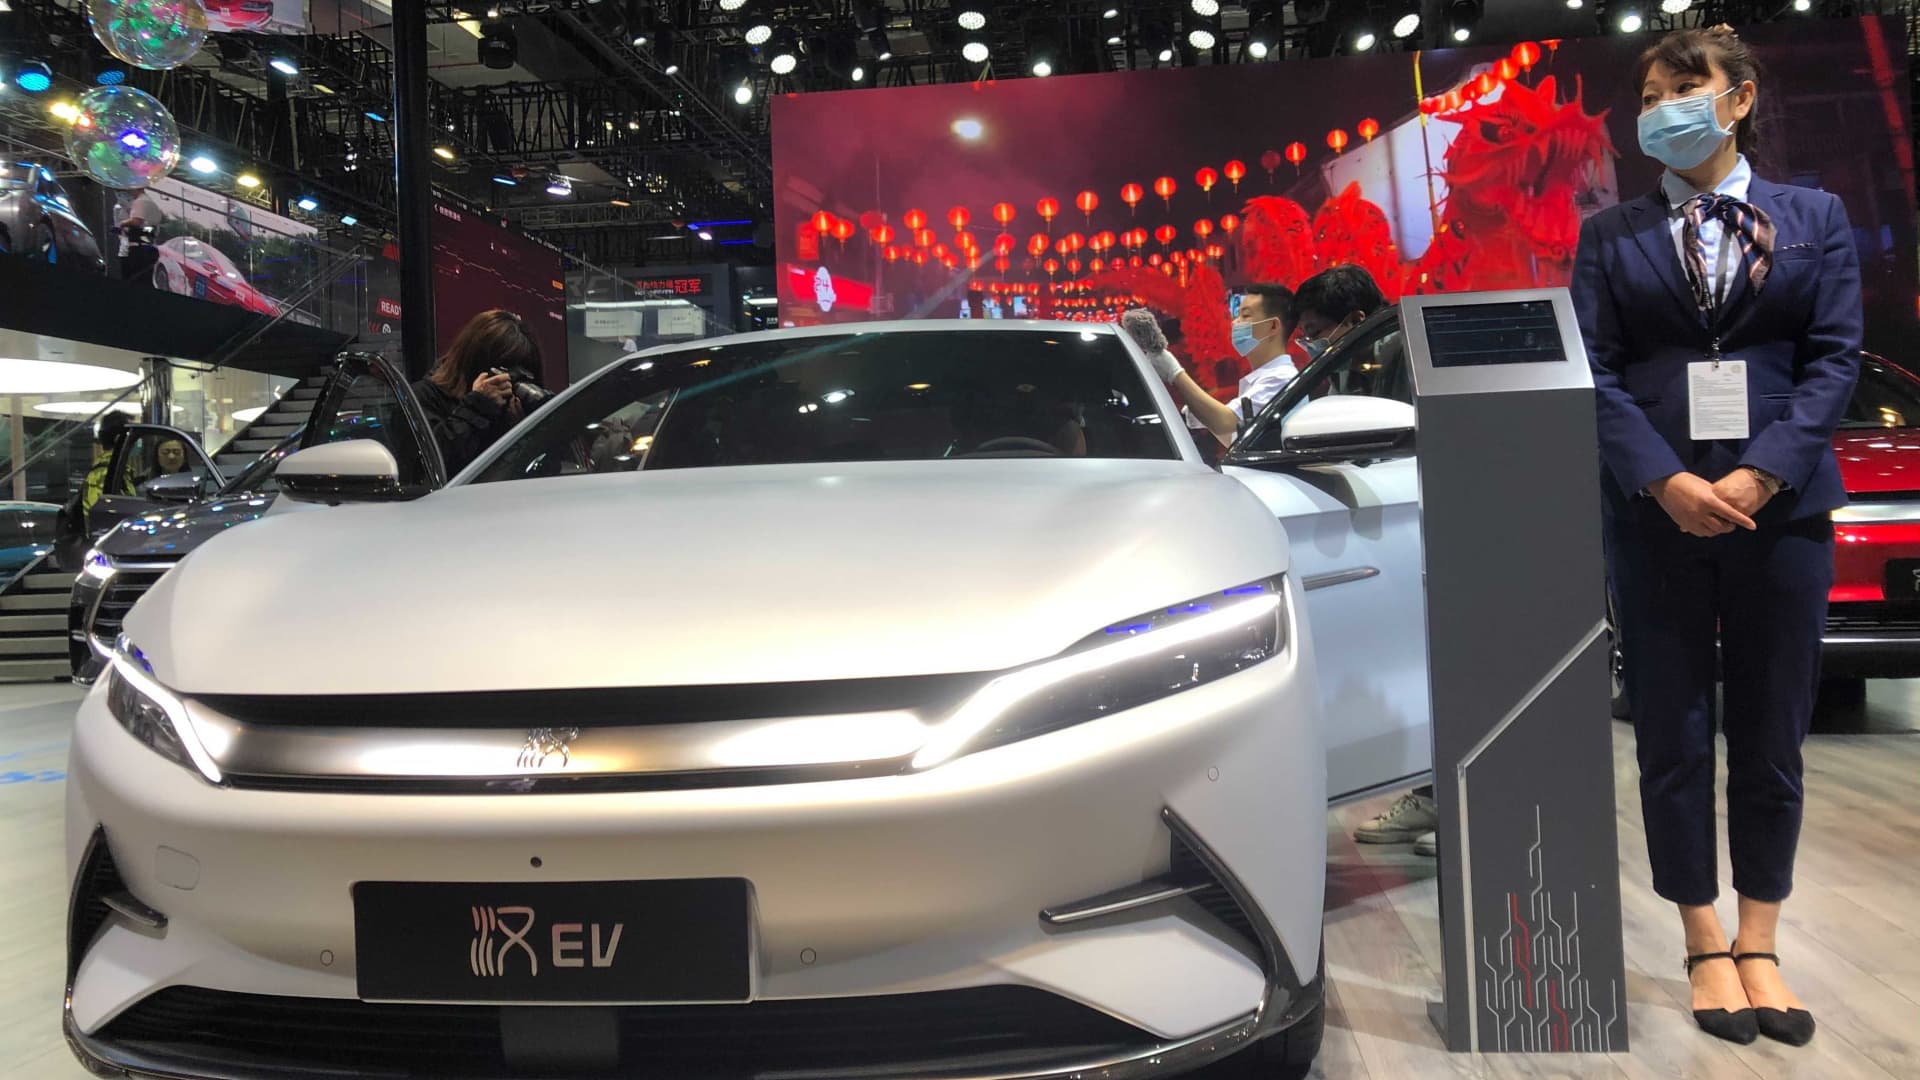 Tesla minimize EV selling prices in China much more than BYD did for its flagship Han sedan this year, review finds